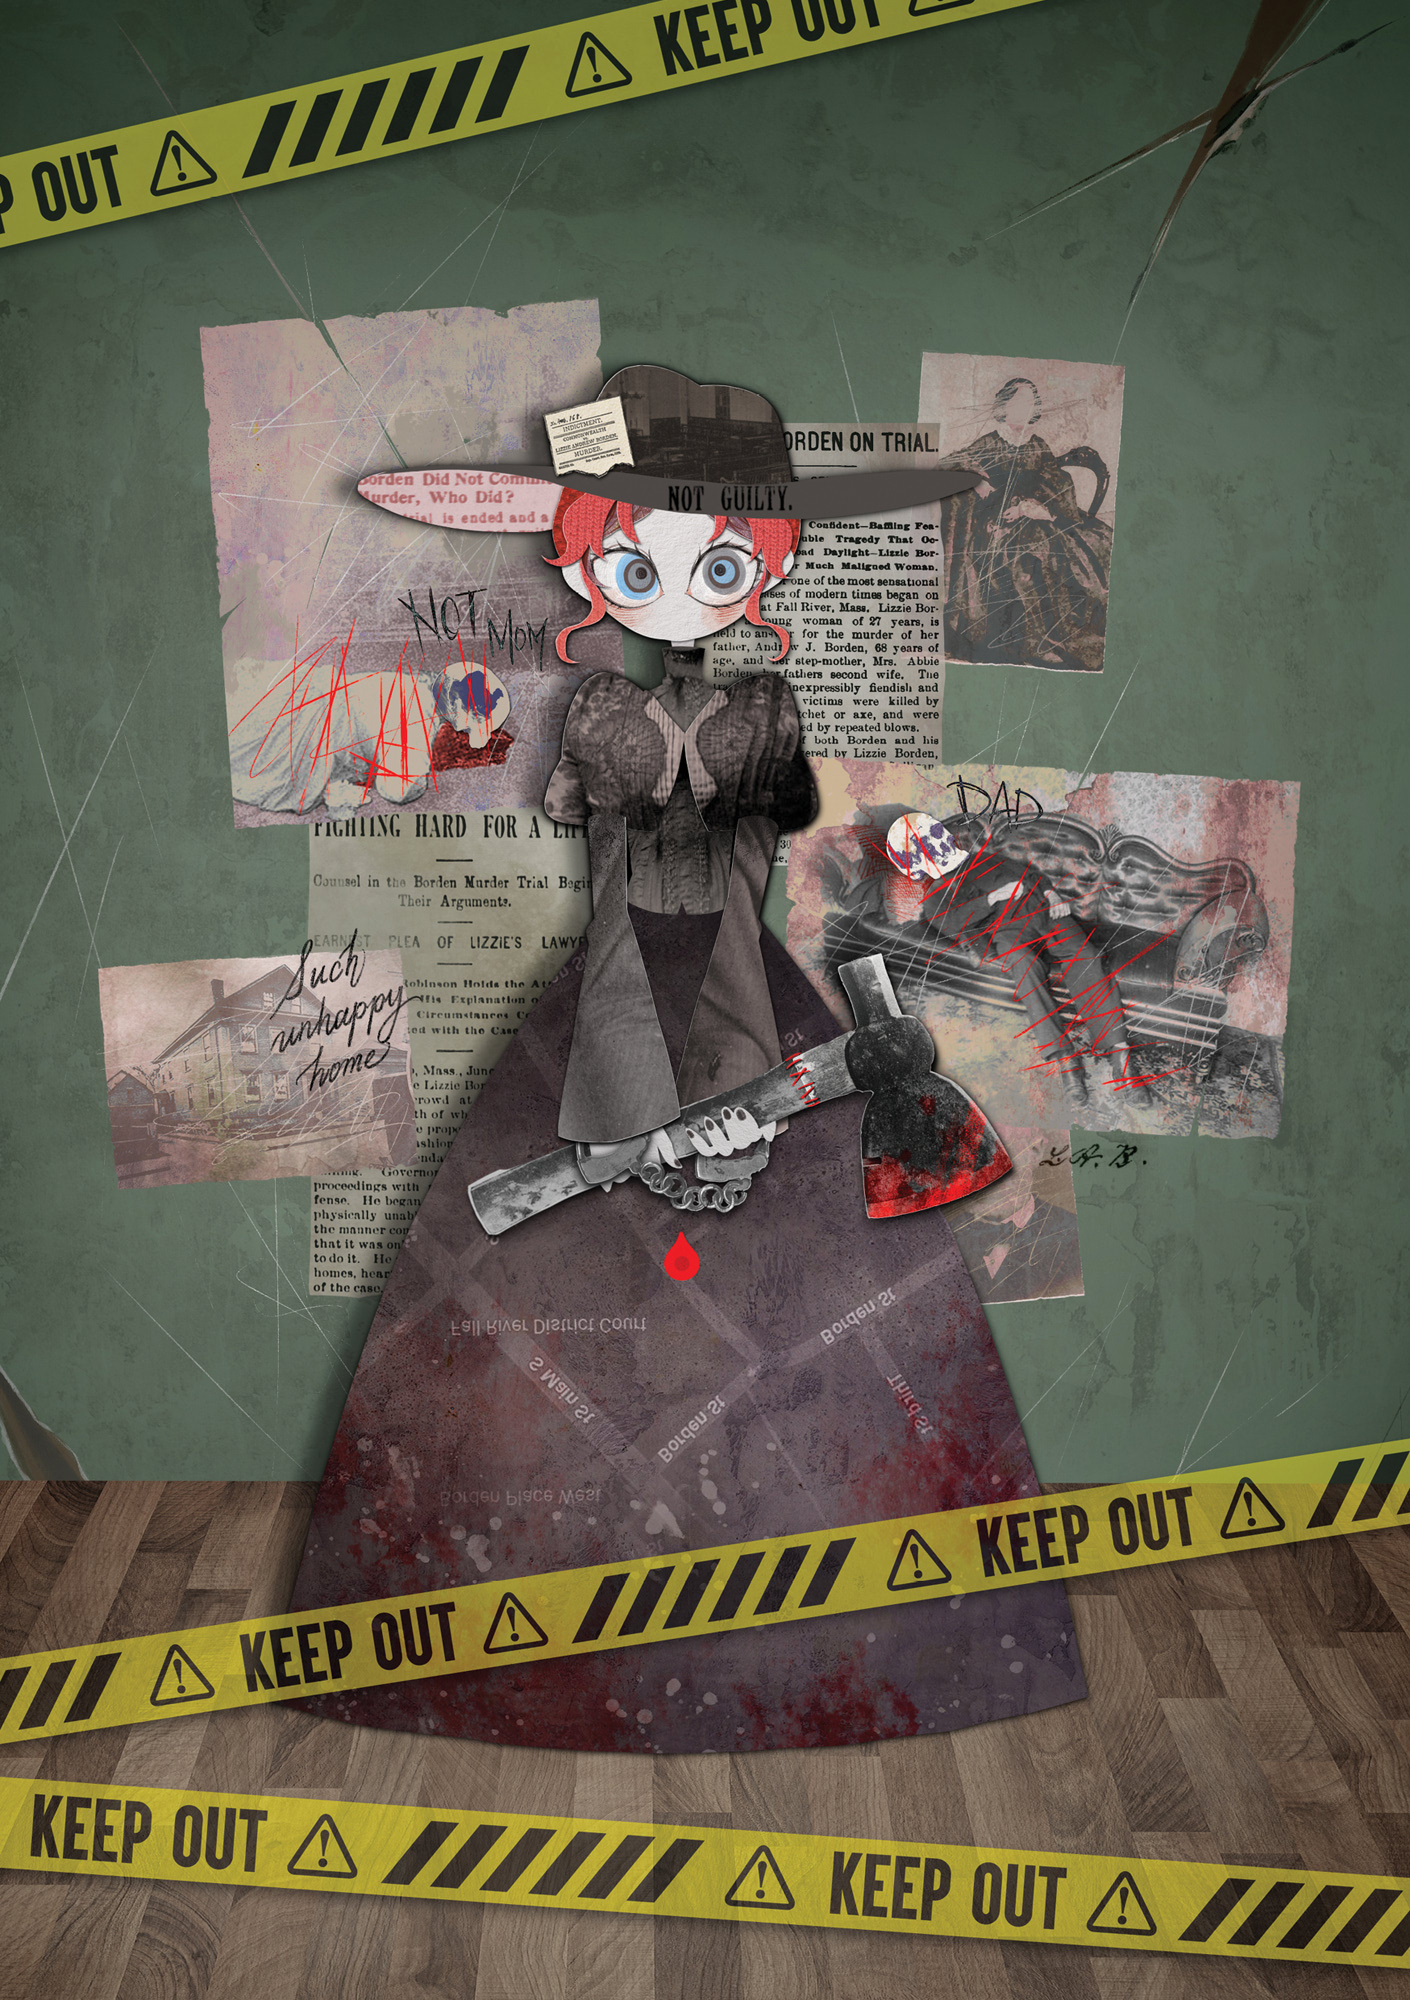 Illustration of Lizzie Borden. Lizzie is wearing a black hat and dress, handcuffed, holding an bloodied axe, standing in front of a dark green wall, with yellow tapes saying "keep out" in front. Text on her hat says "not guilty"; a map is on her dress showing the location of the crime scene, with the pin upside down, like a blood drop. There are newspaper cutouts and photos on the wall, featuring the trail, crime scenes, and photos of Lizzie's parents with their faces smudged. Writings on photos include: House: "such unhappy home", body of Abby: "Not mom", body of Andrew: "Dad".  